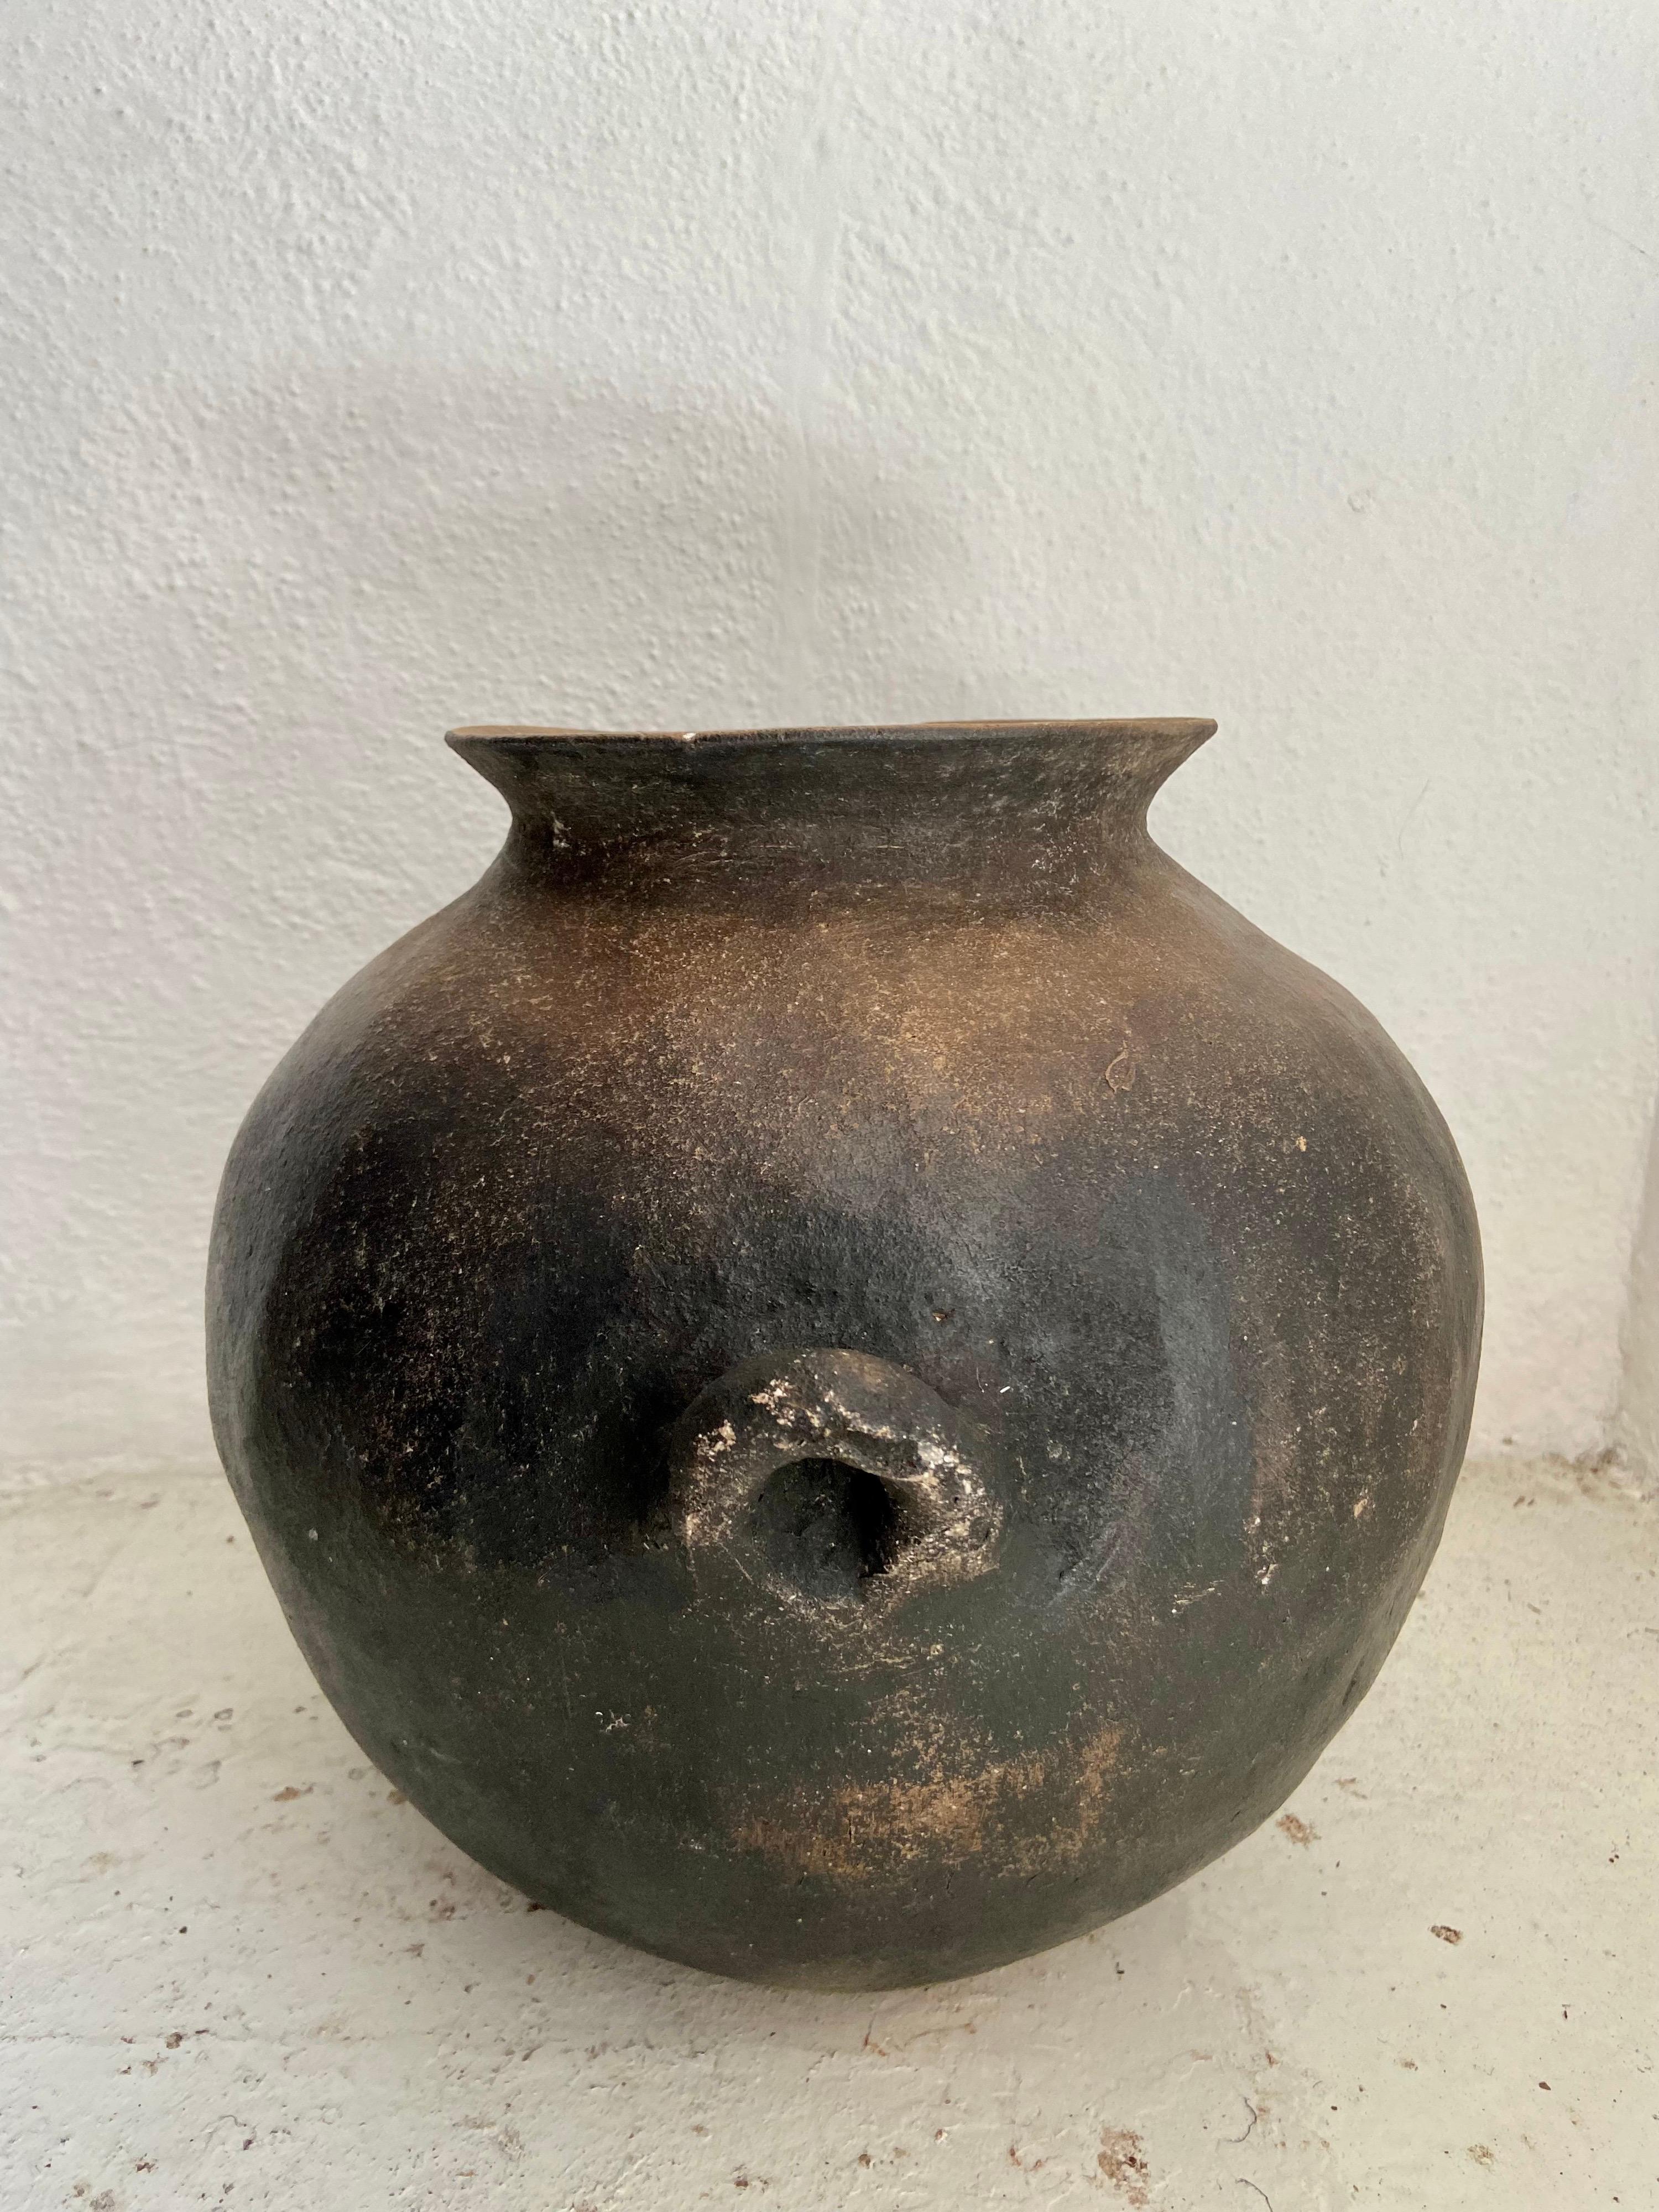 Fired Mid 20th Century Terracotta Water Pot from Central Mexico